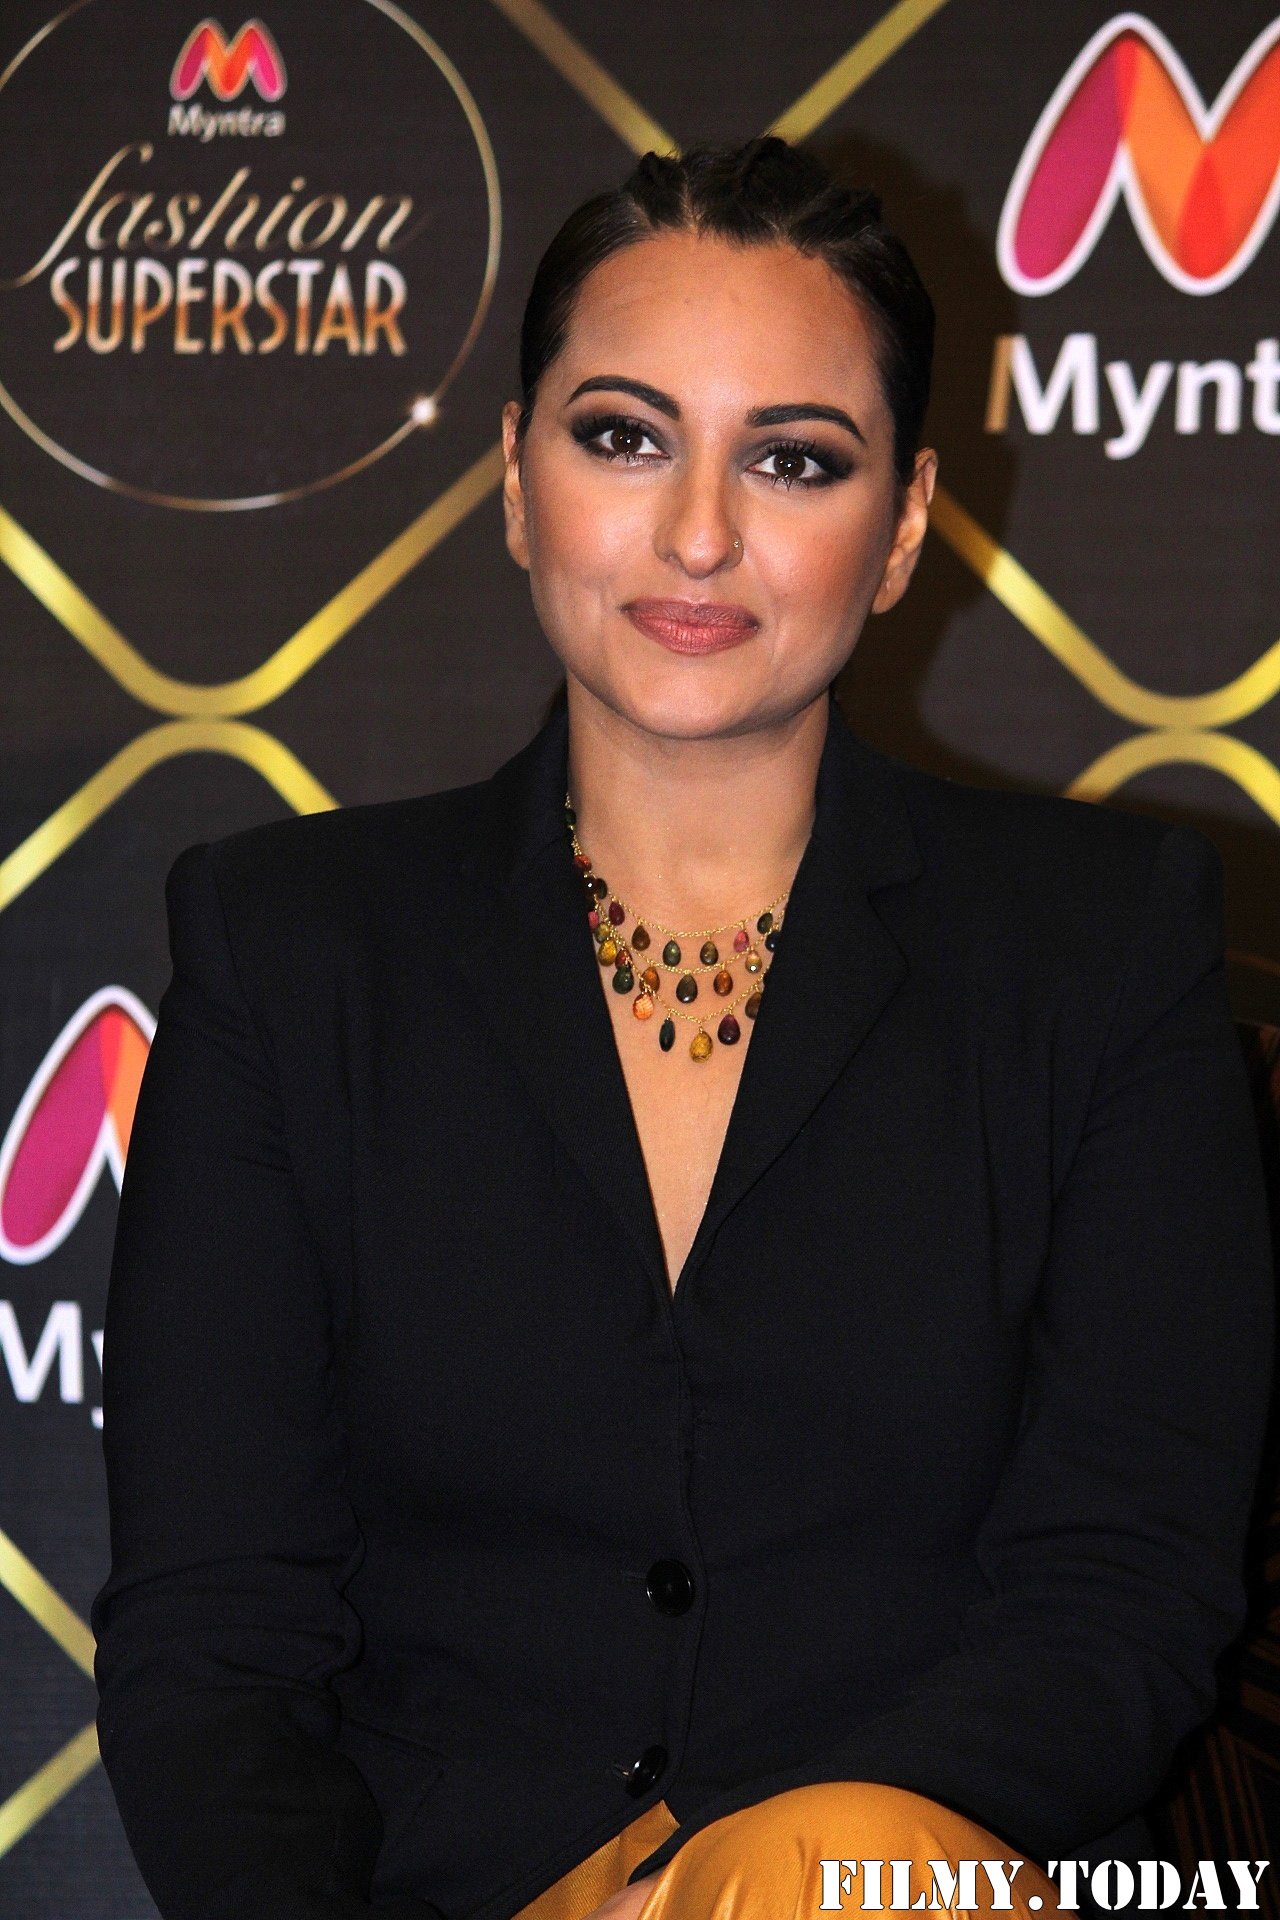 Photos: Sonakshi Sinha At The Launch Of ‘Fashion Superstar’ | Picture 1680814